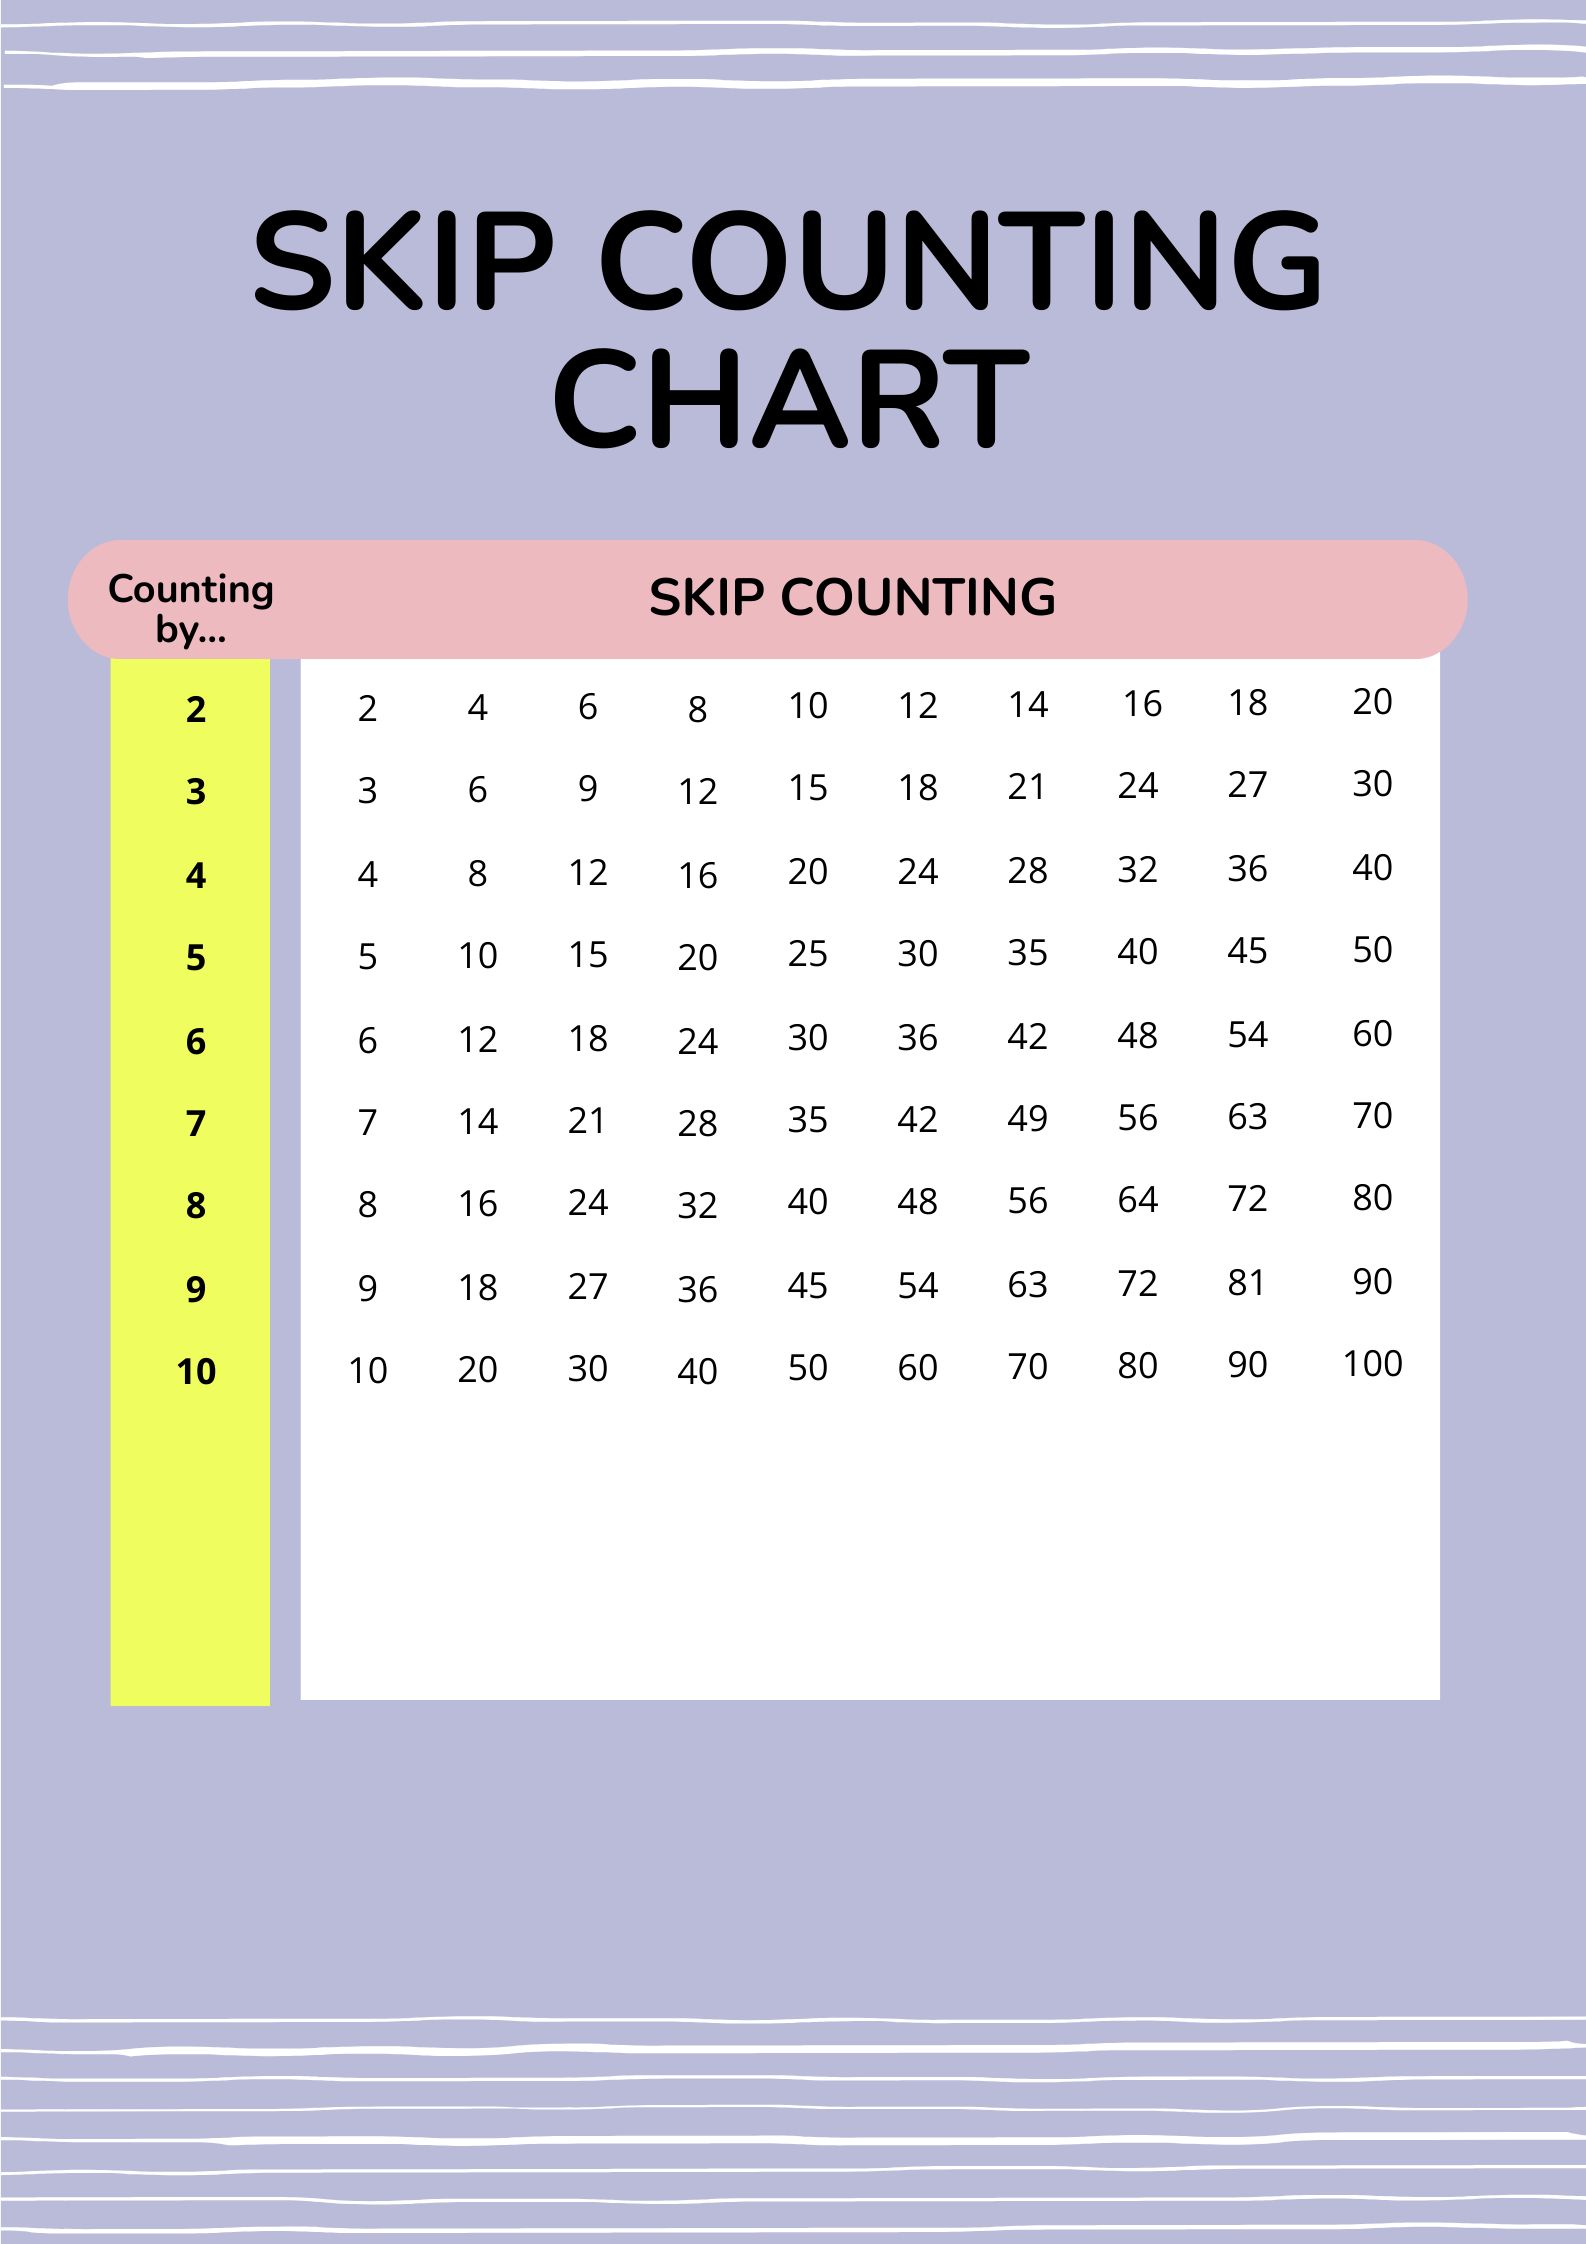 skip-counting-chart-in-illustrator-pdf-download-template